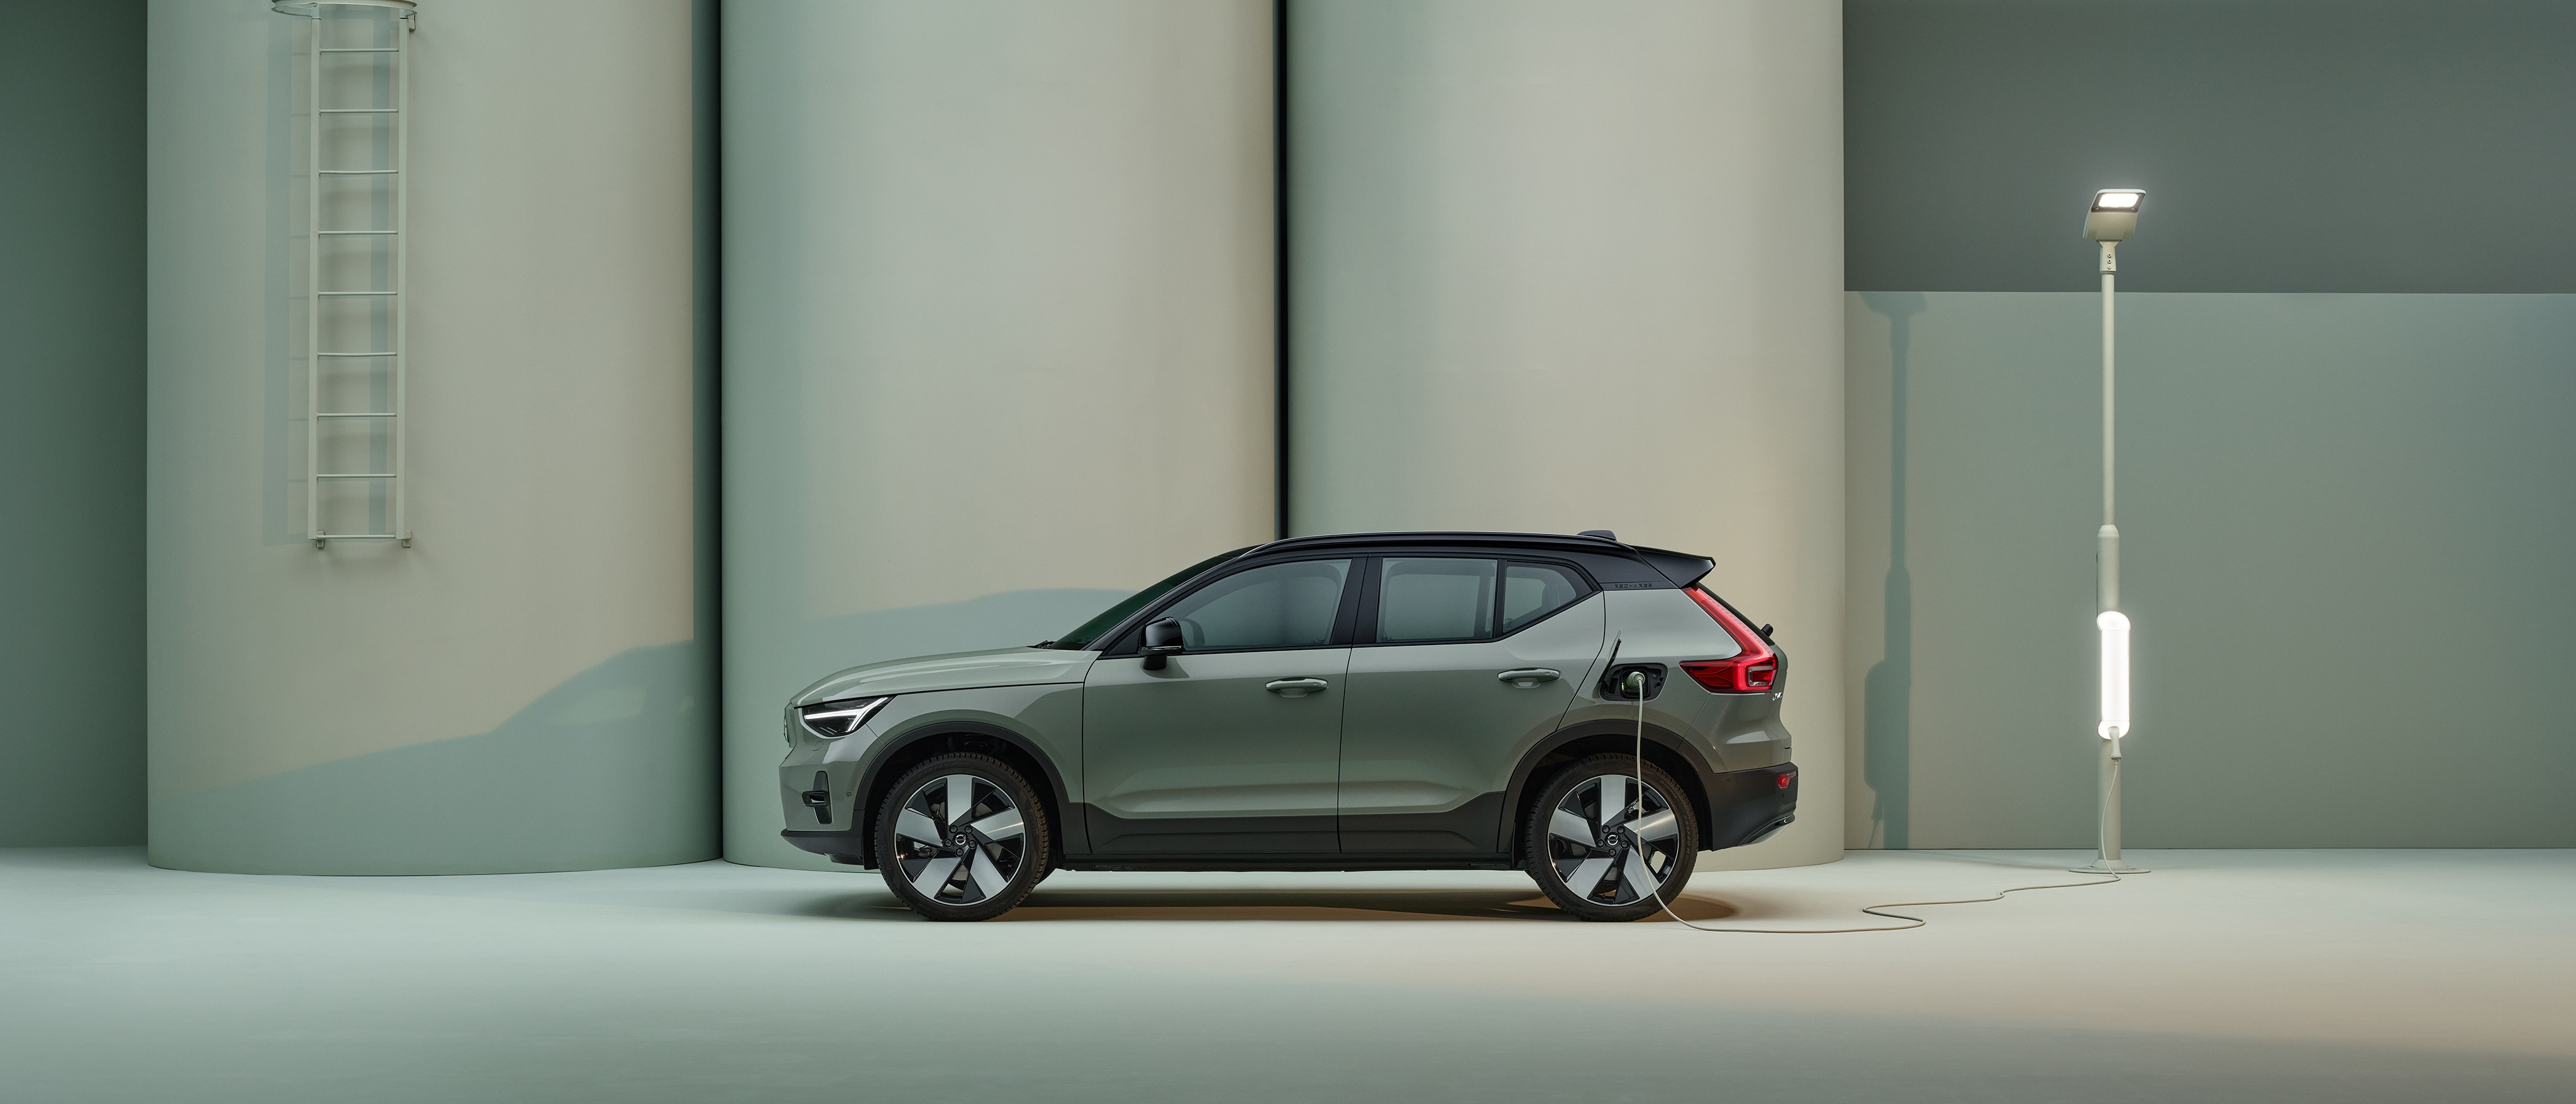 The side profile of a green Volvo XC40 Recharge pure electric SUV.